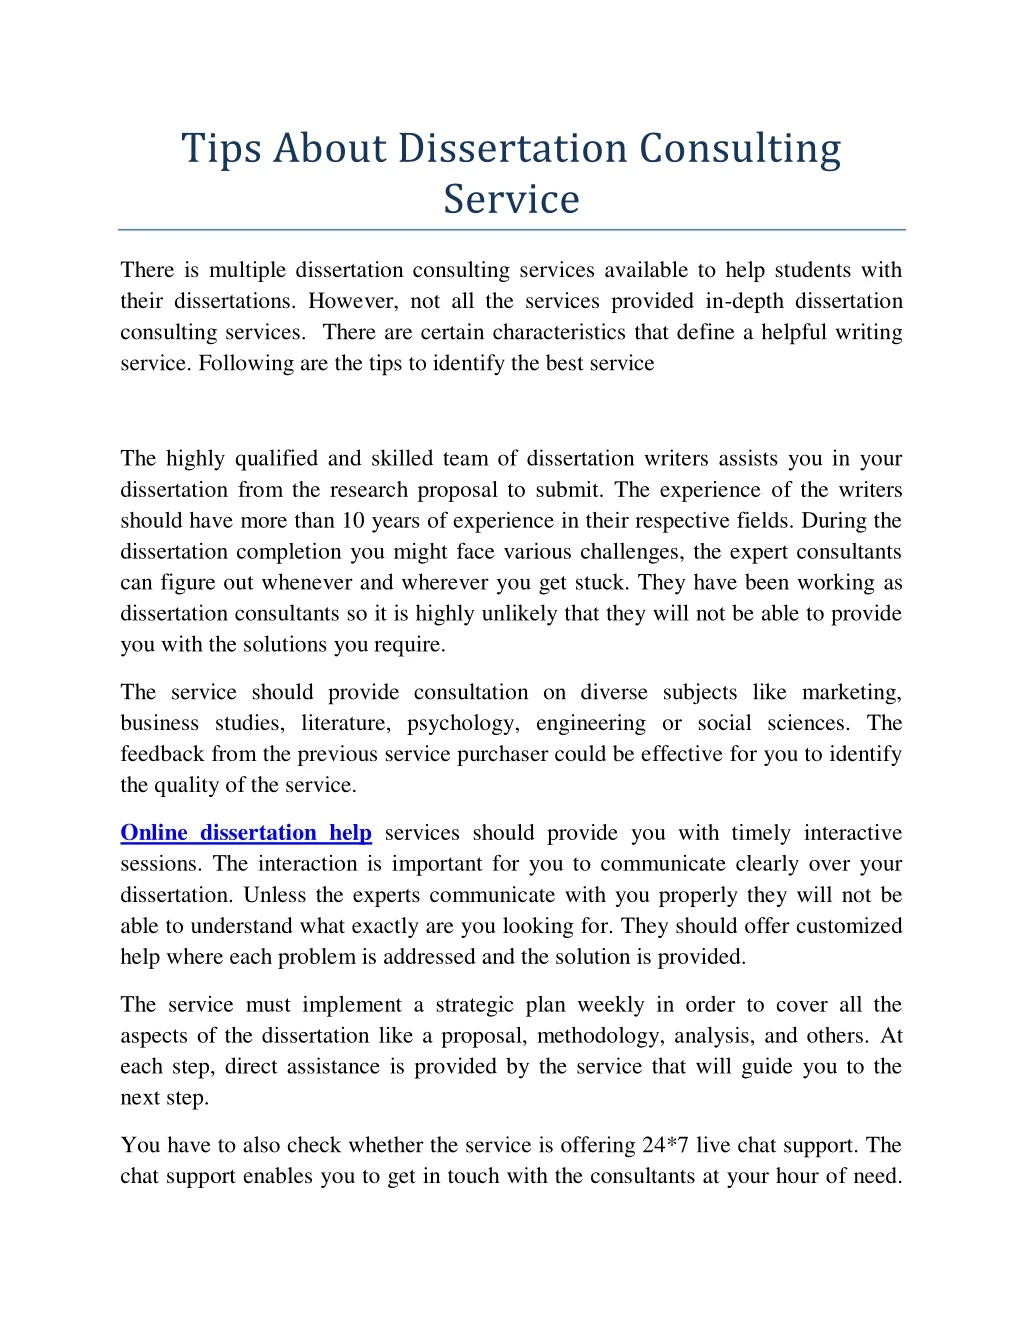 tips about dissertation consulting service